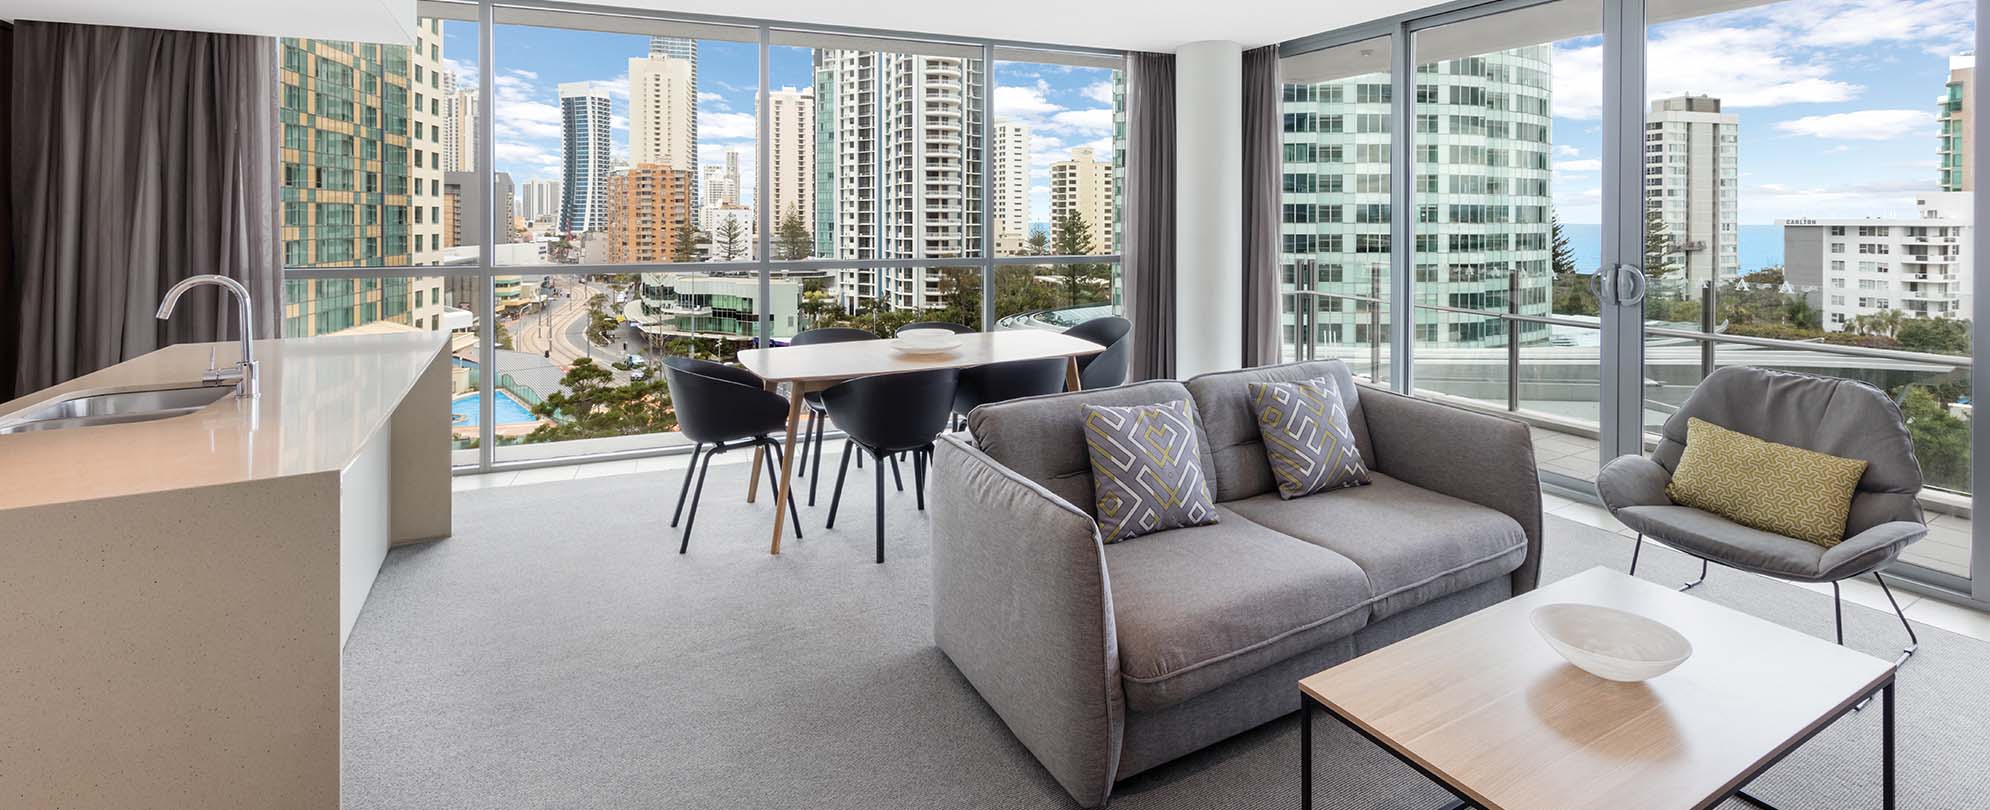 The dining and living area of a 2-bedroom suite at Club Wyndham Surfers Paradise.